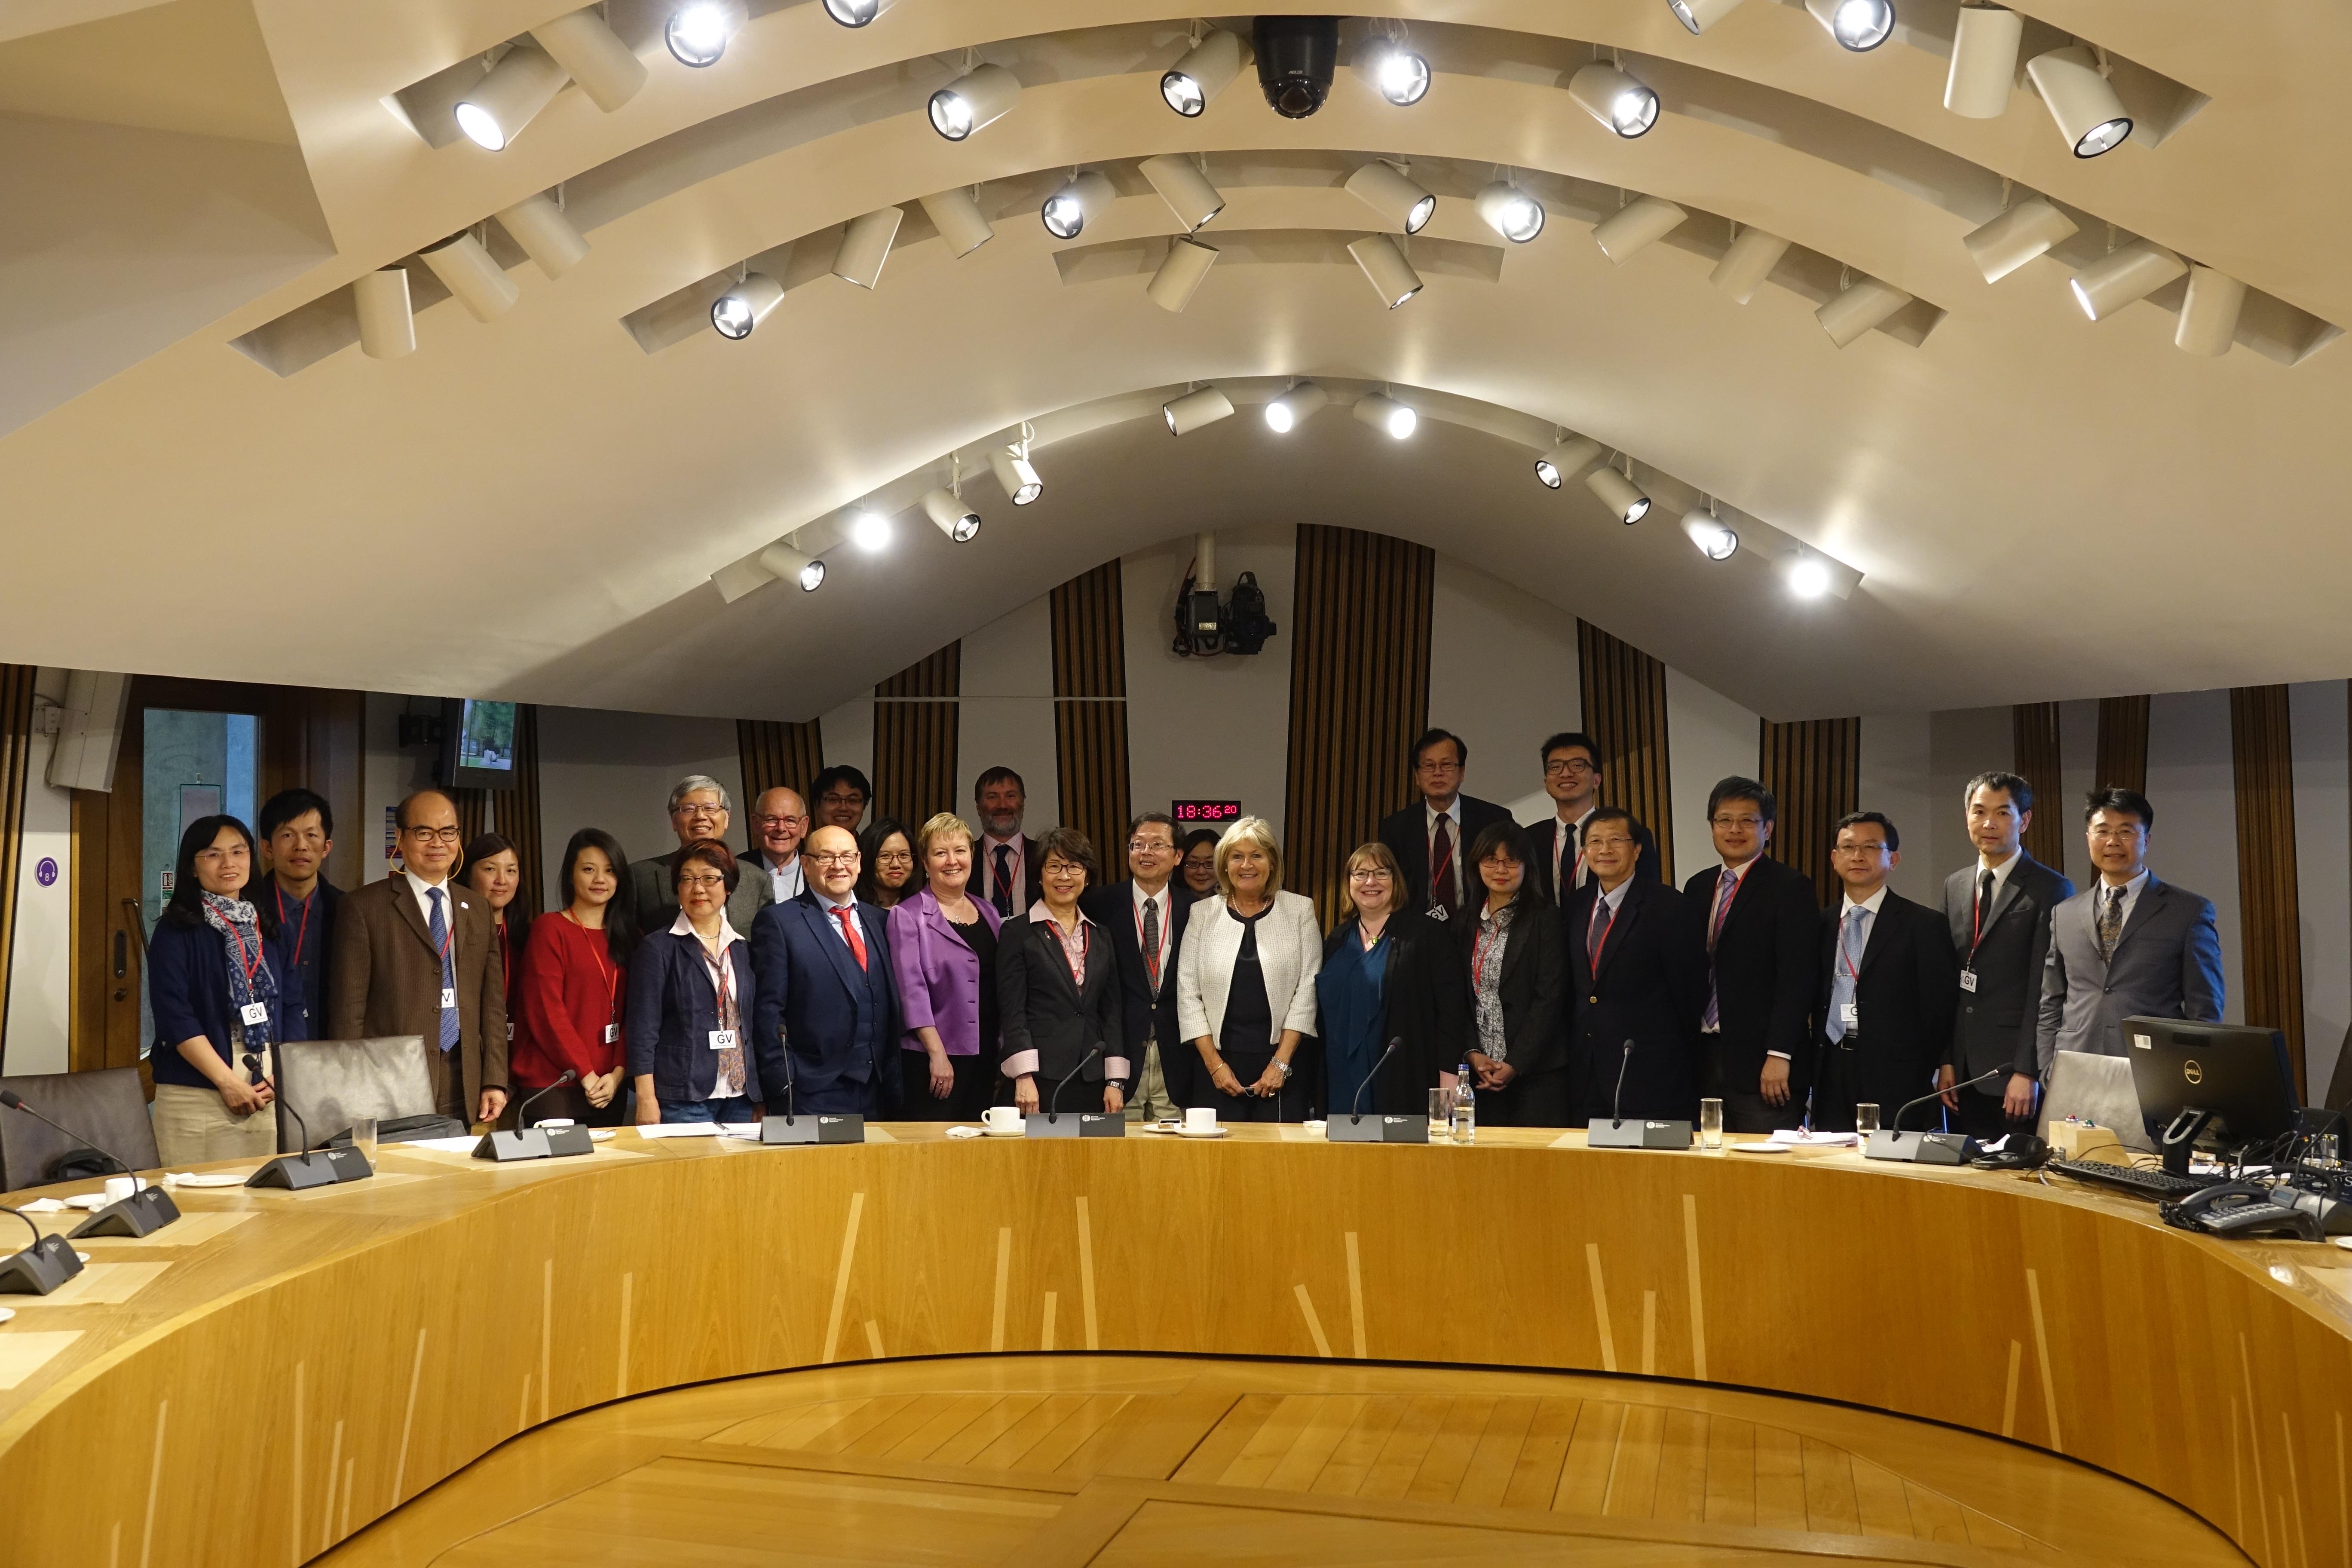 On 11 th May the 2017 All Energy Delegation from Taiwan attends the meeting of "Cross Party Group on Taiwan" at Scottish Parliament